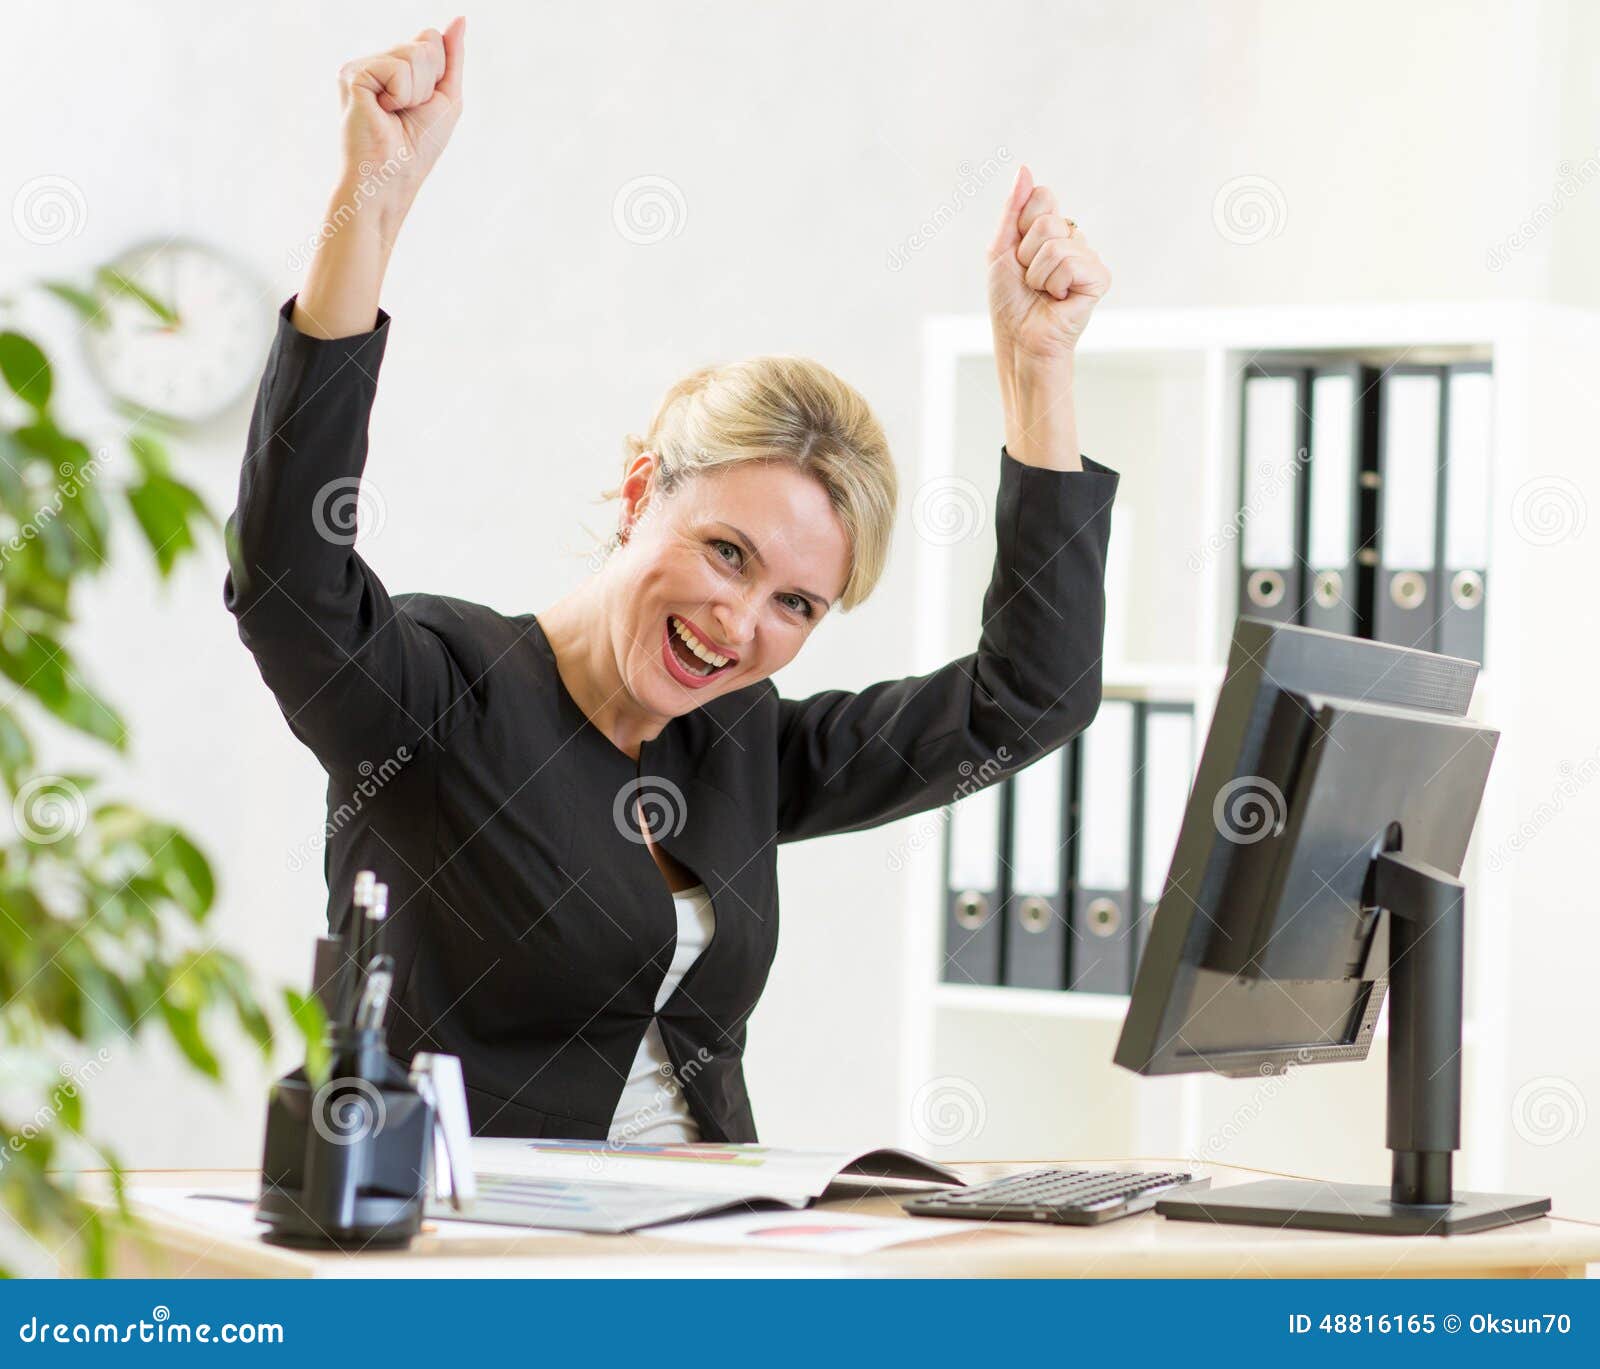 successful business woman with arms up in office